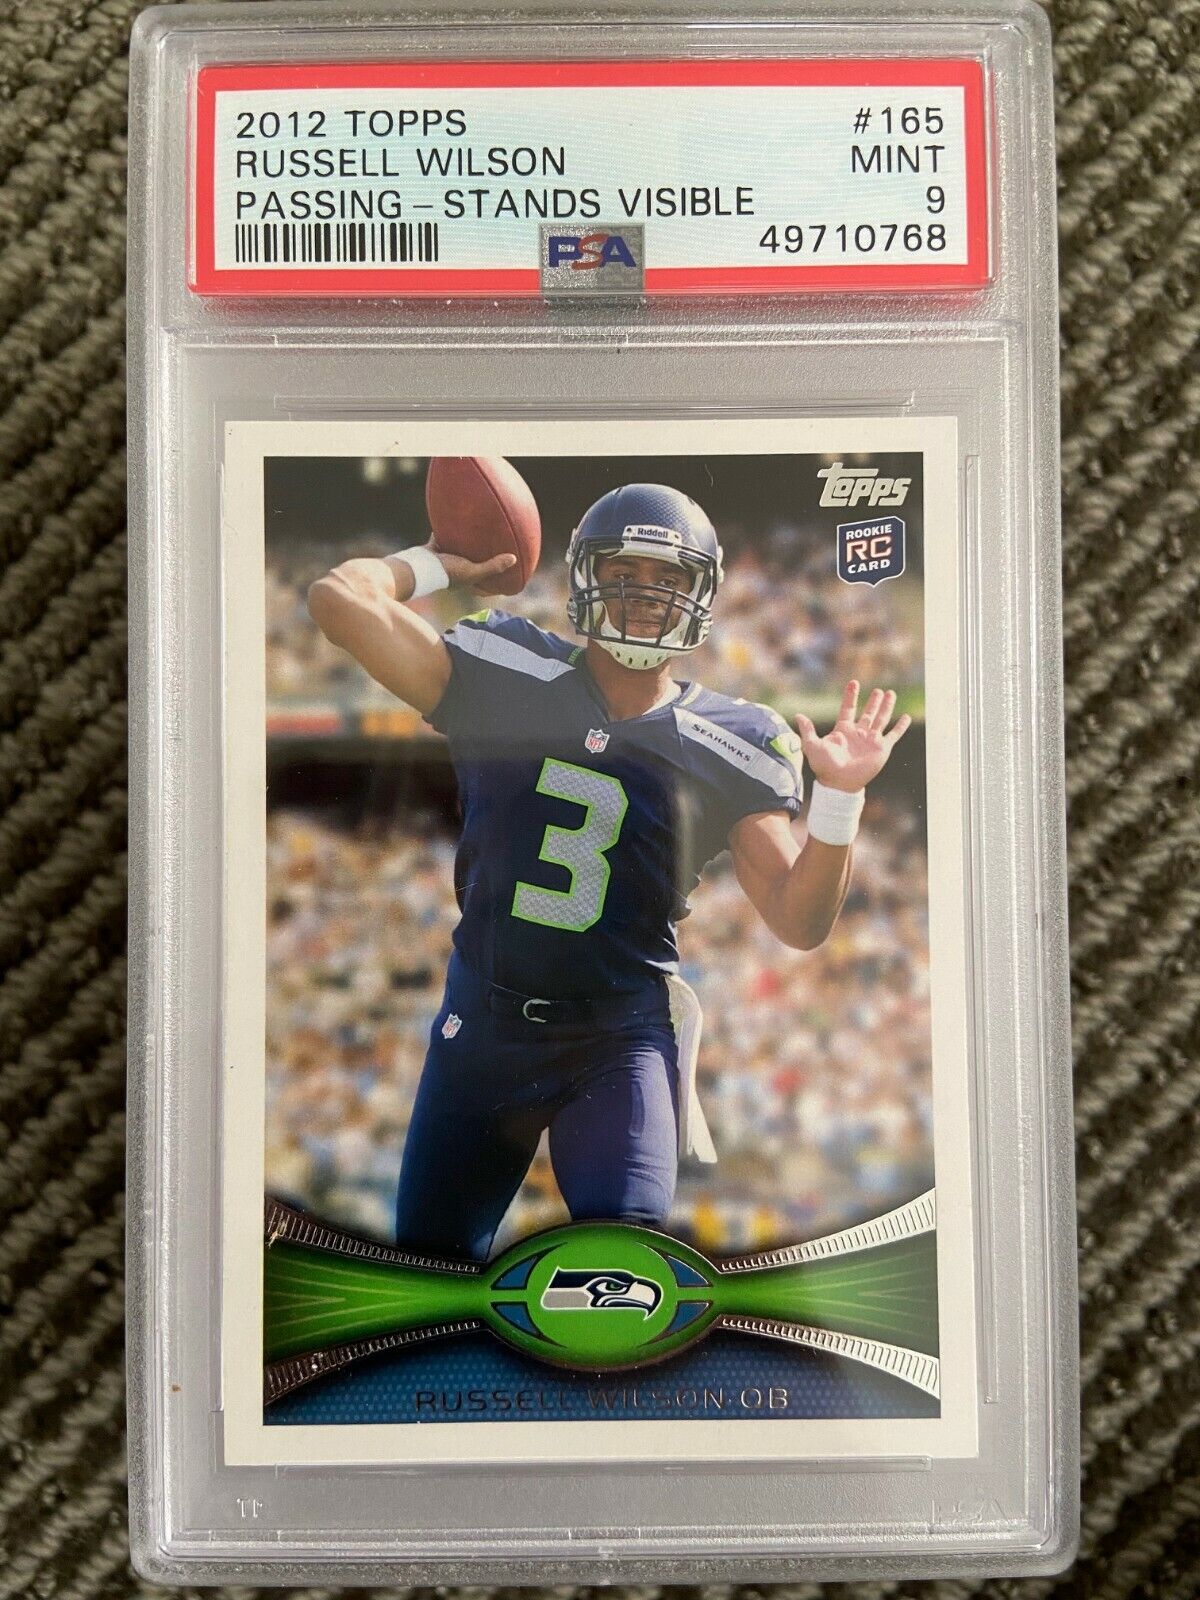 2012 Topps Russell Wilson #165 Passing Stands Visible Rookie PSA 9 MINT